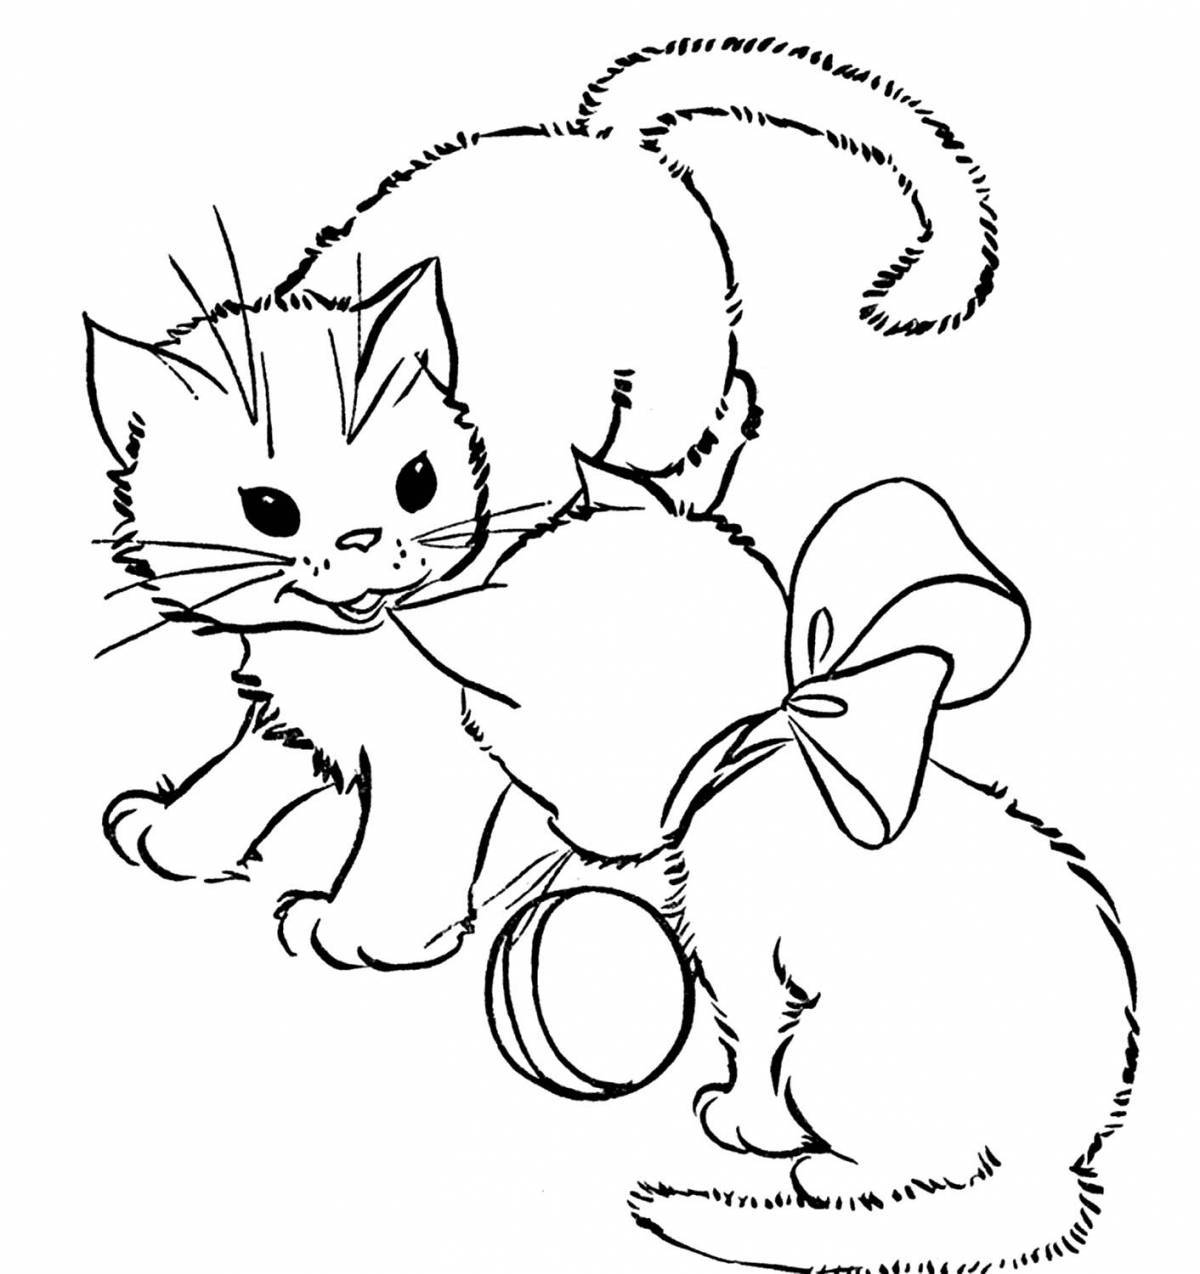 Live coloring cat for children 6-7 years old